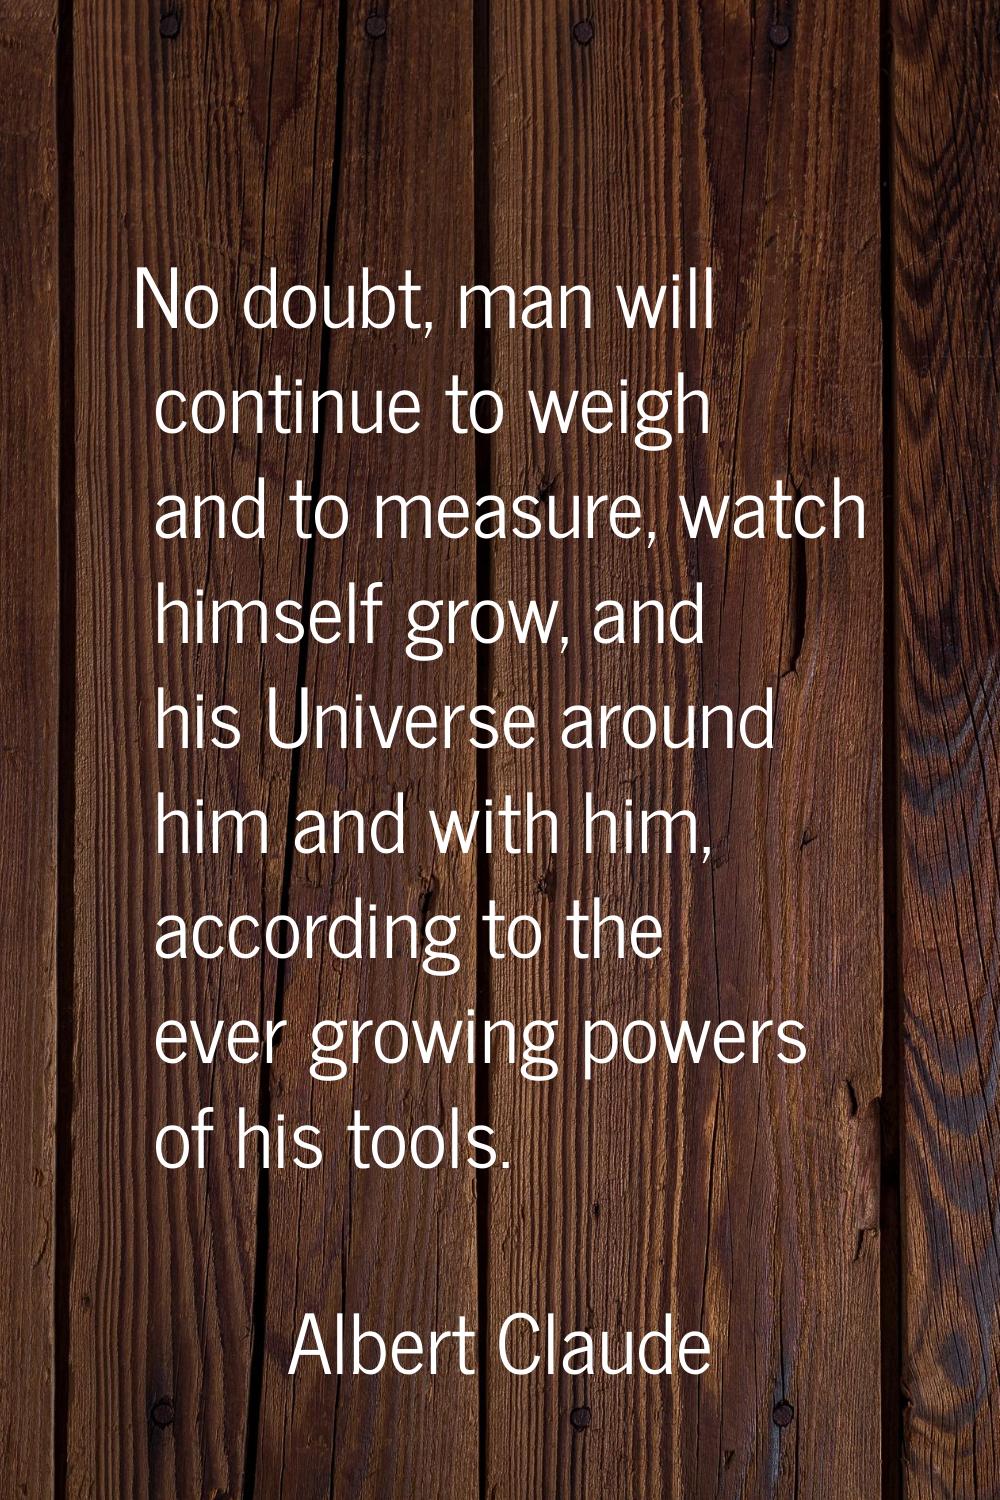 No doubt, man will continue to weigh and to measure, watch himself grow, and his Universe around hi